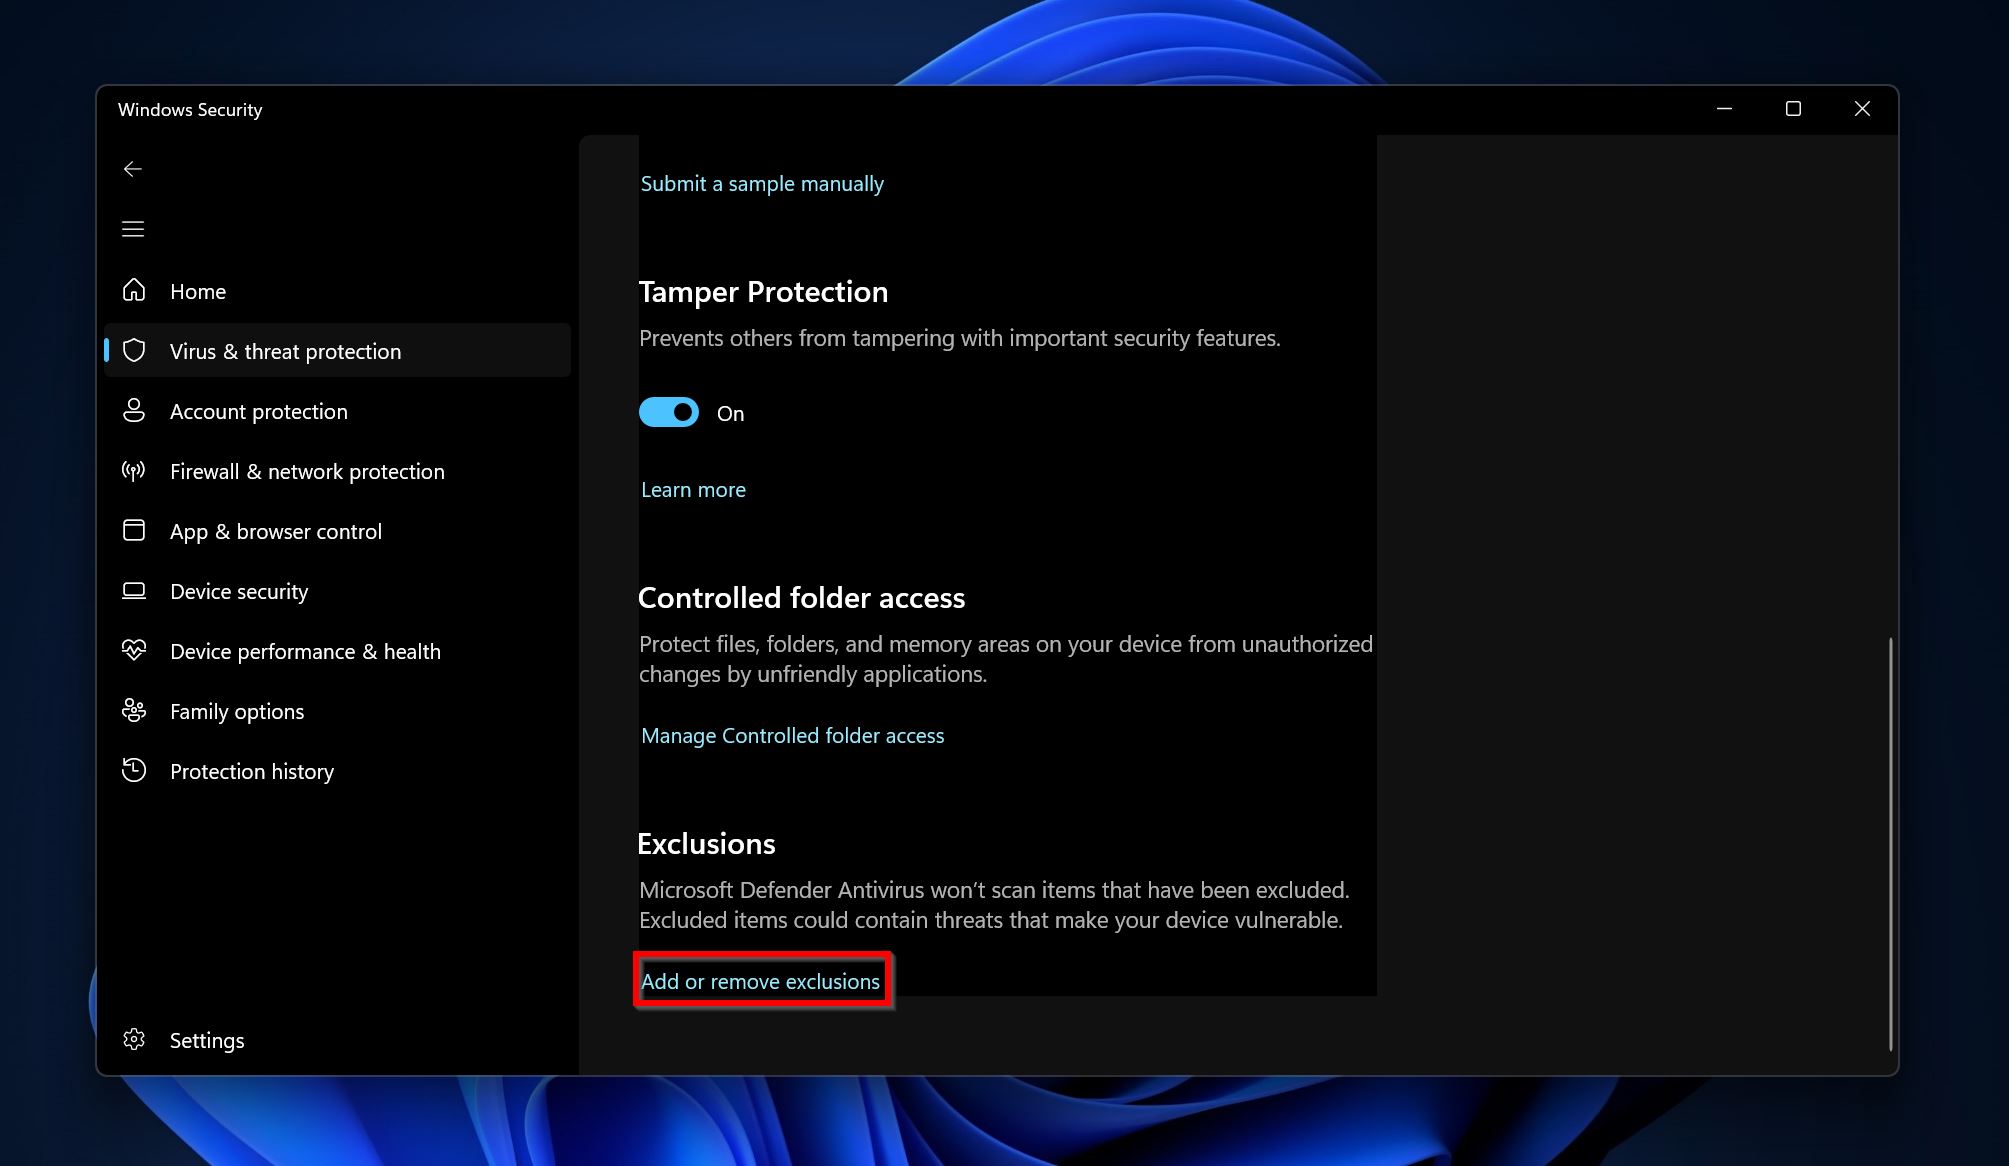 Add or remove exclusions in Windows Defender.